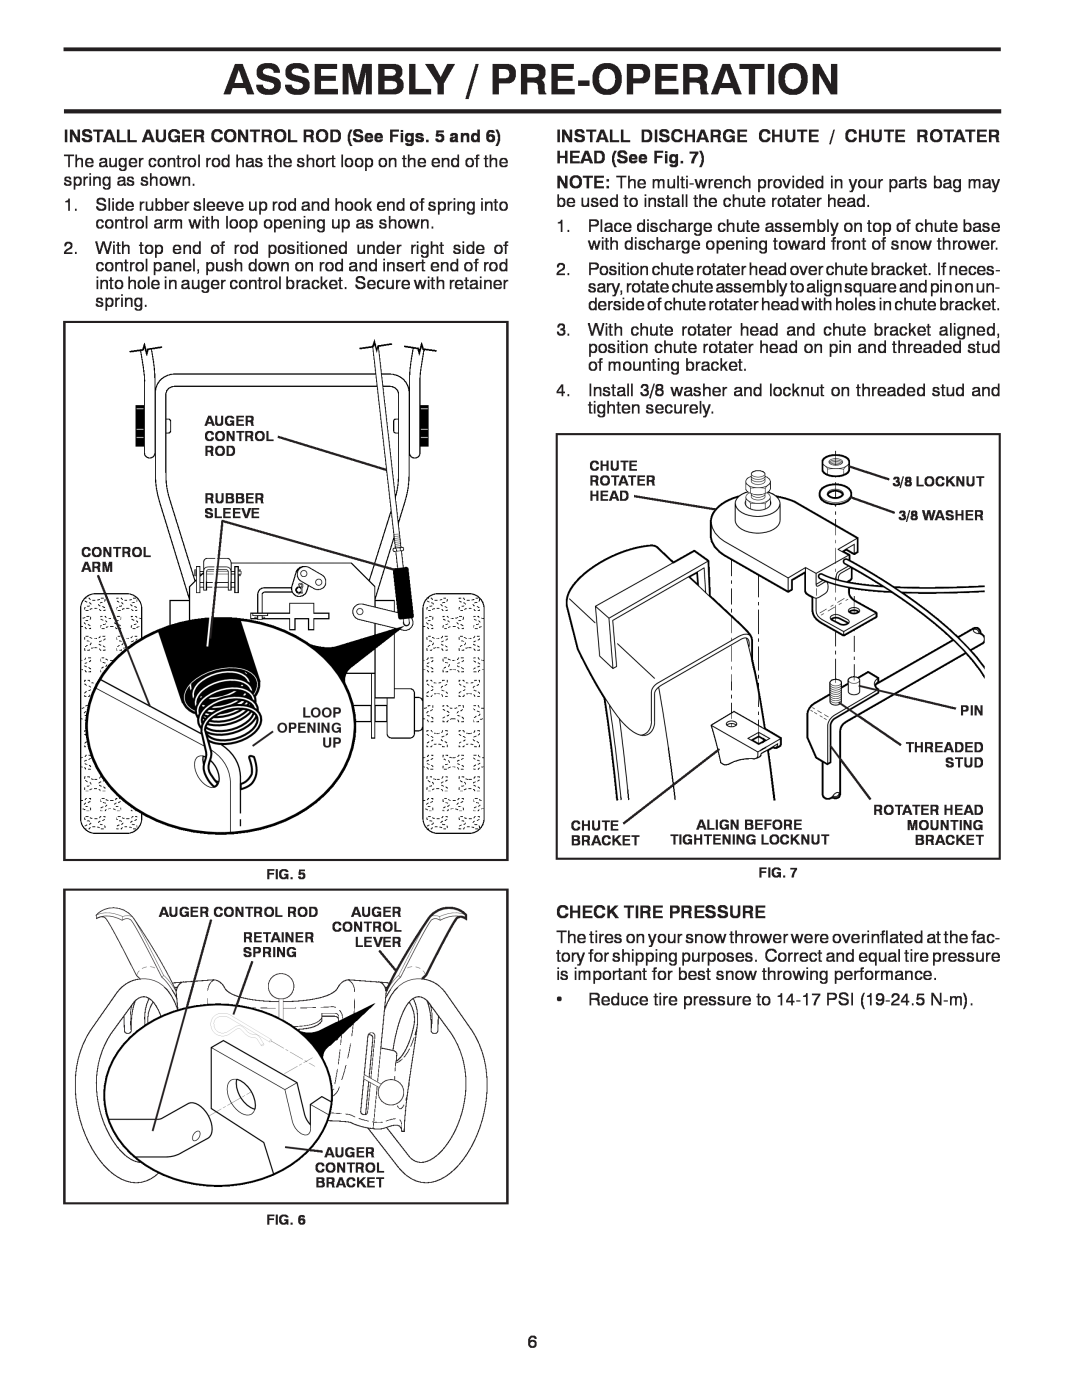 Poulan 96192002201, 422080 Assembly / Pre-Operation, INSTALL AUGER CONTROL ROD See Figs. 5 and, Check Tire Pressure 